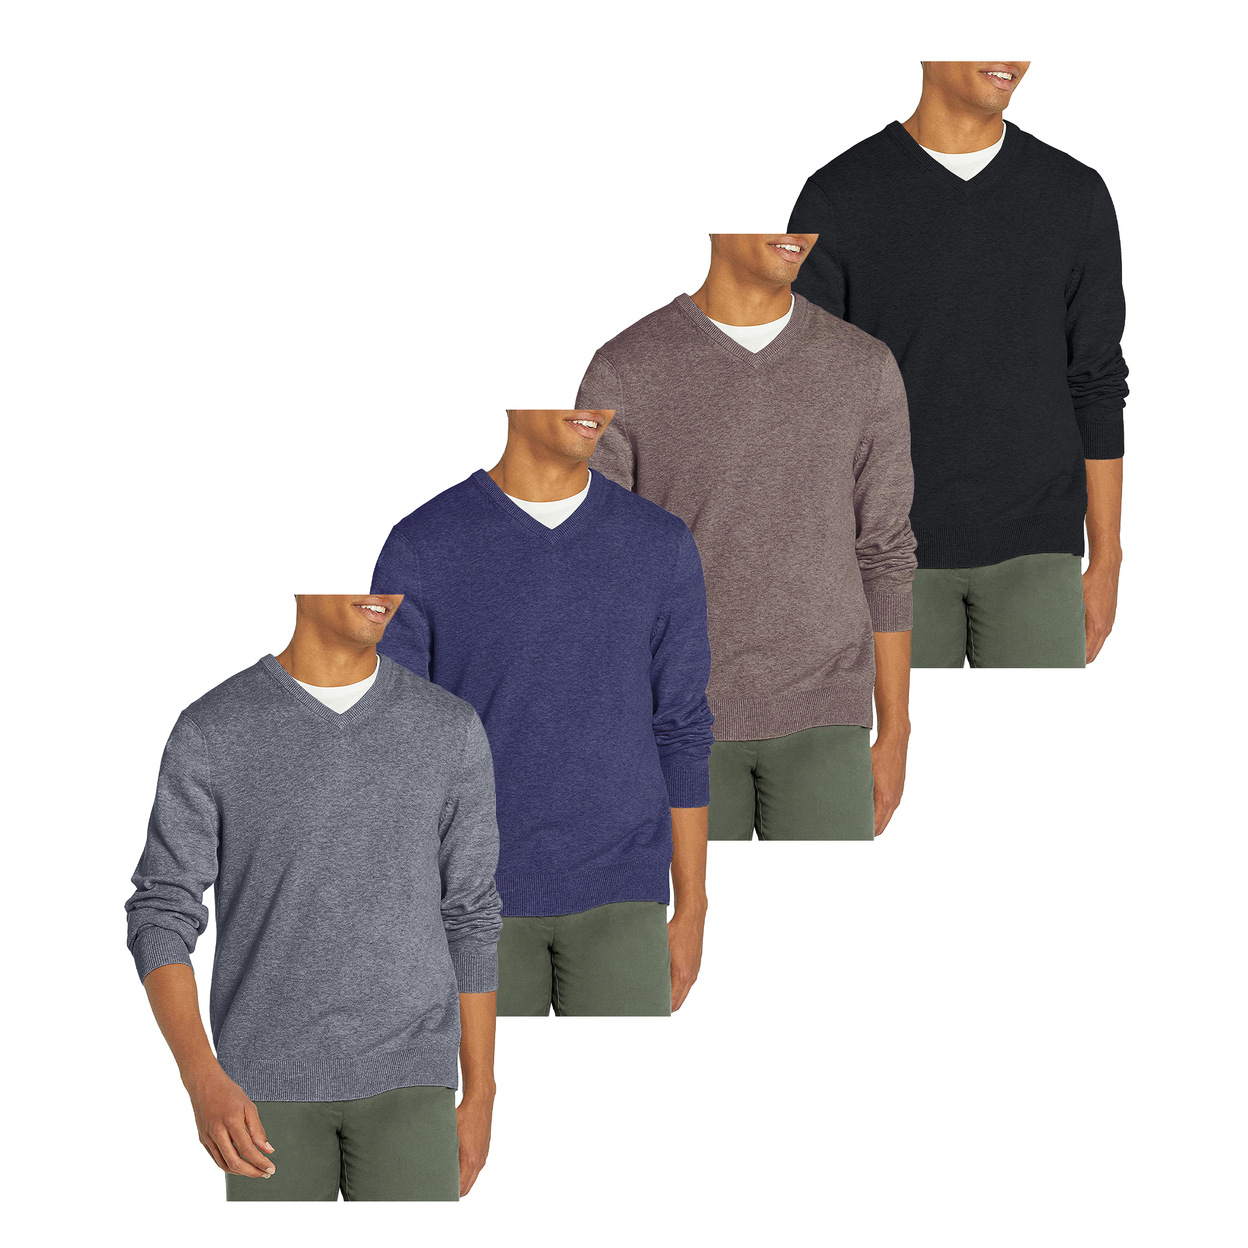 Multi-Pack: Men's Casual Ultra Soft Slim Fit Warm Knit V-Neck Sweater - 1-pack, Xx-large